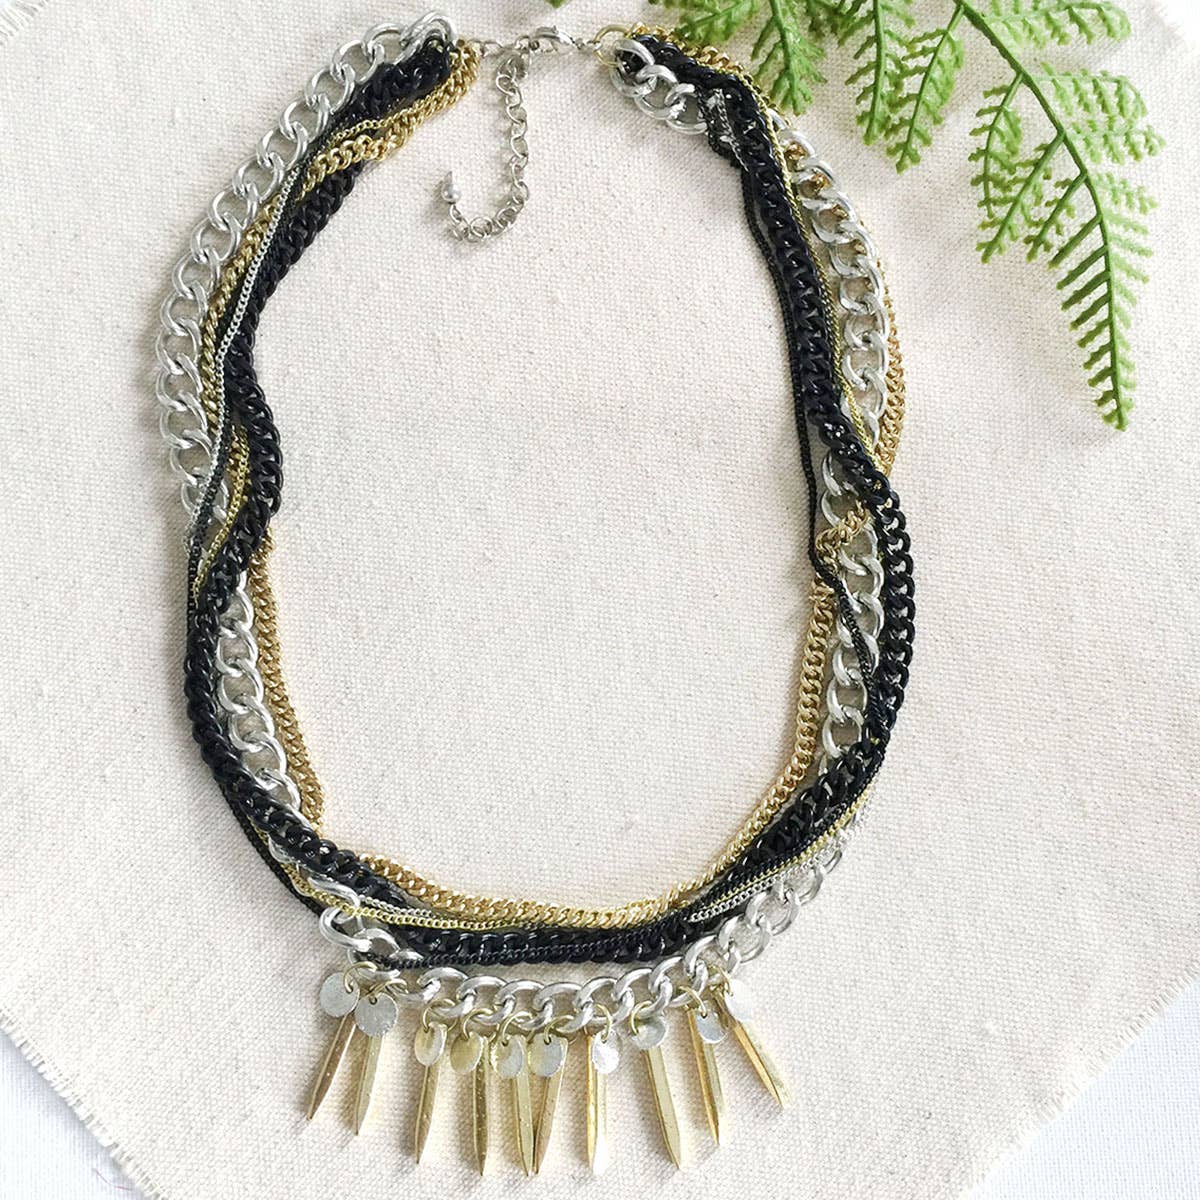 Spiked Metallic Necklace